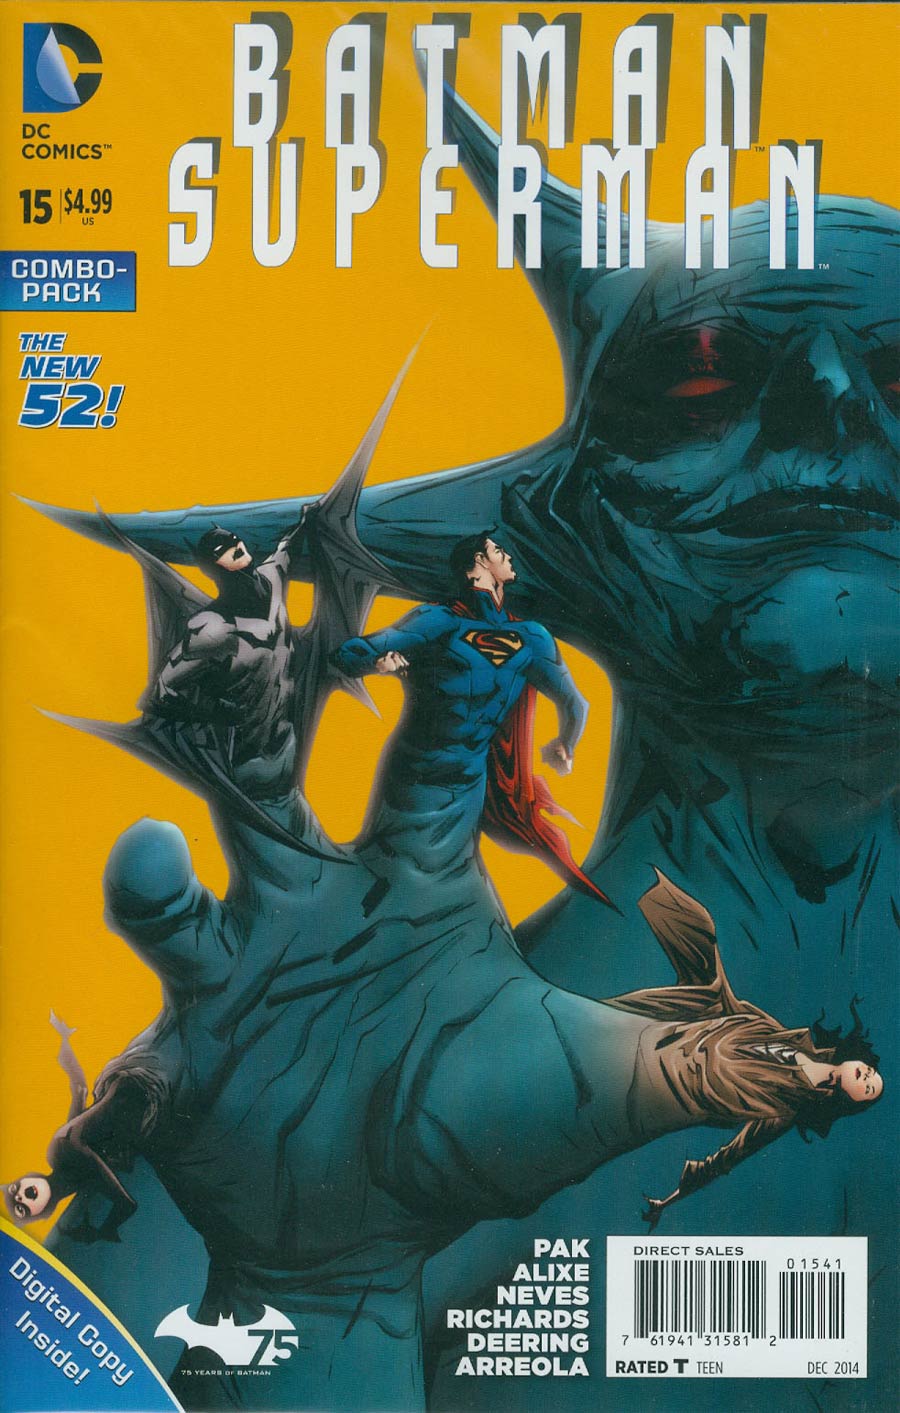 Batman Superman #15 Cover C Combo Pack With Polybag